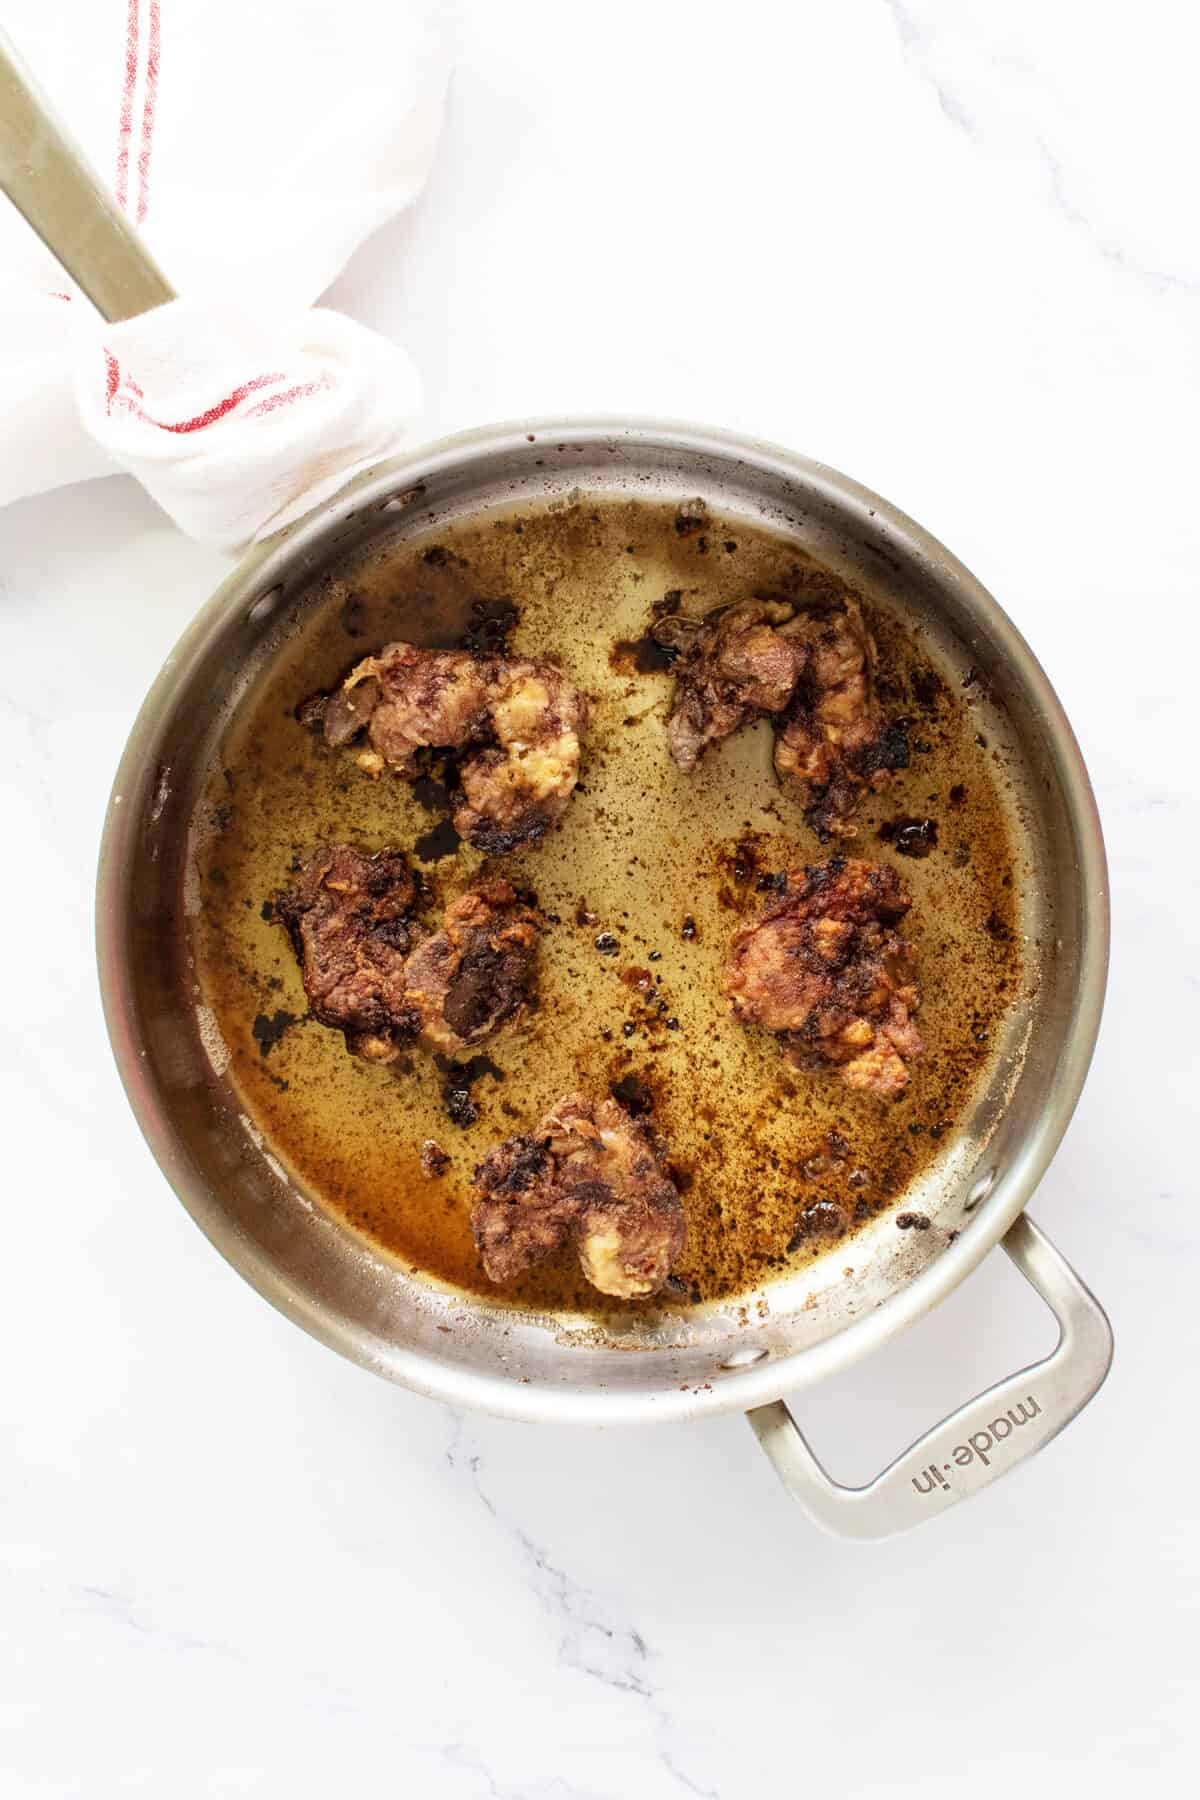 Fried Chicken Livers in a frying pan